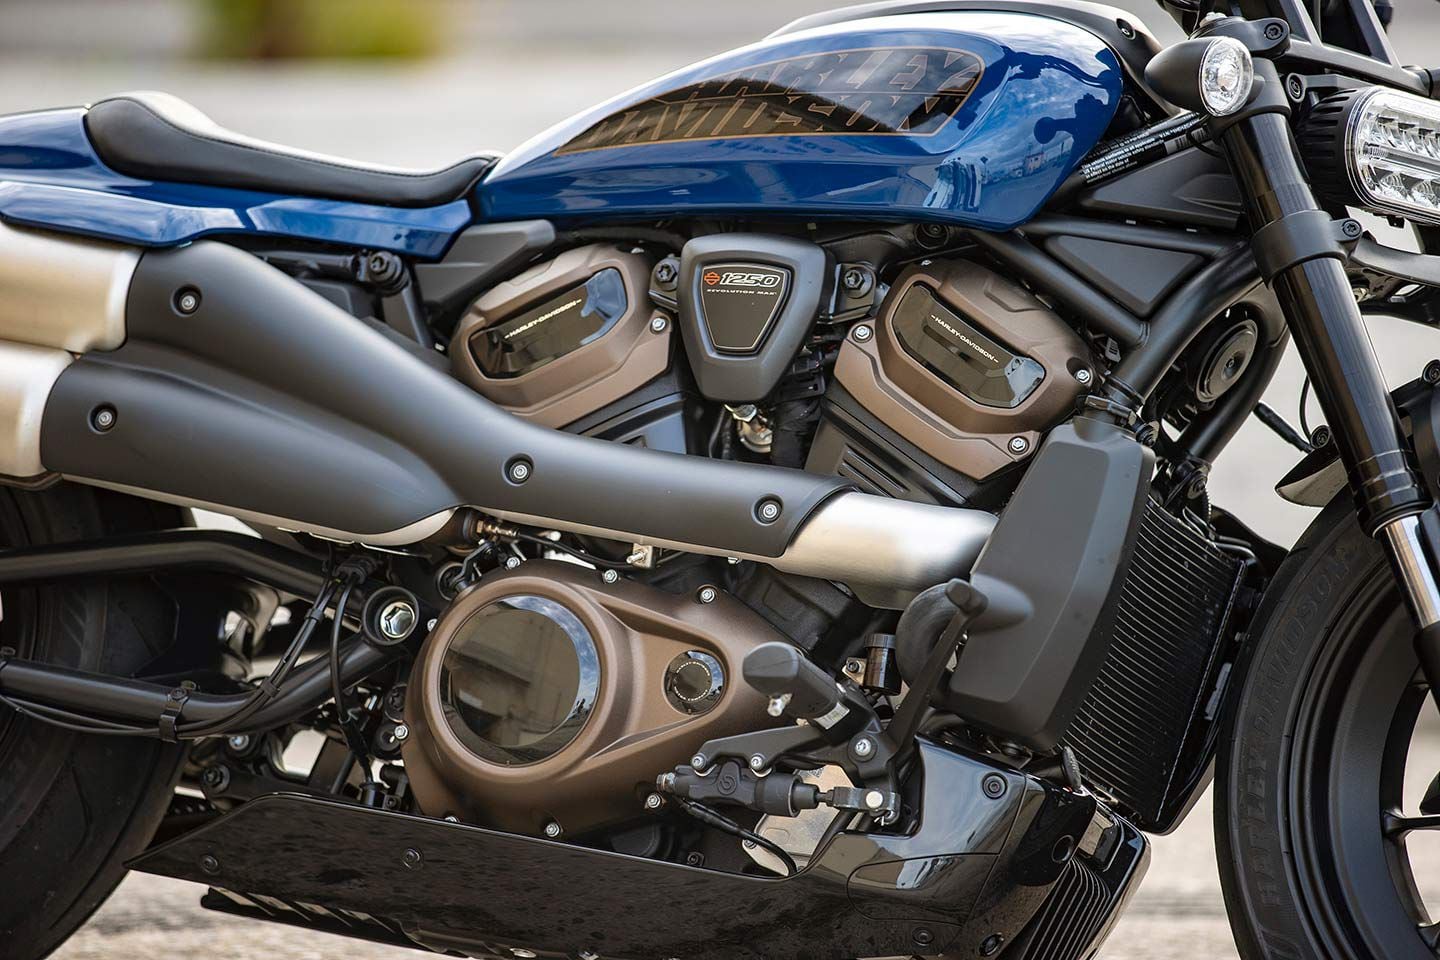 The Revolution Max 1250T looks nothing like a traditional Harley-Davidson engine.